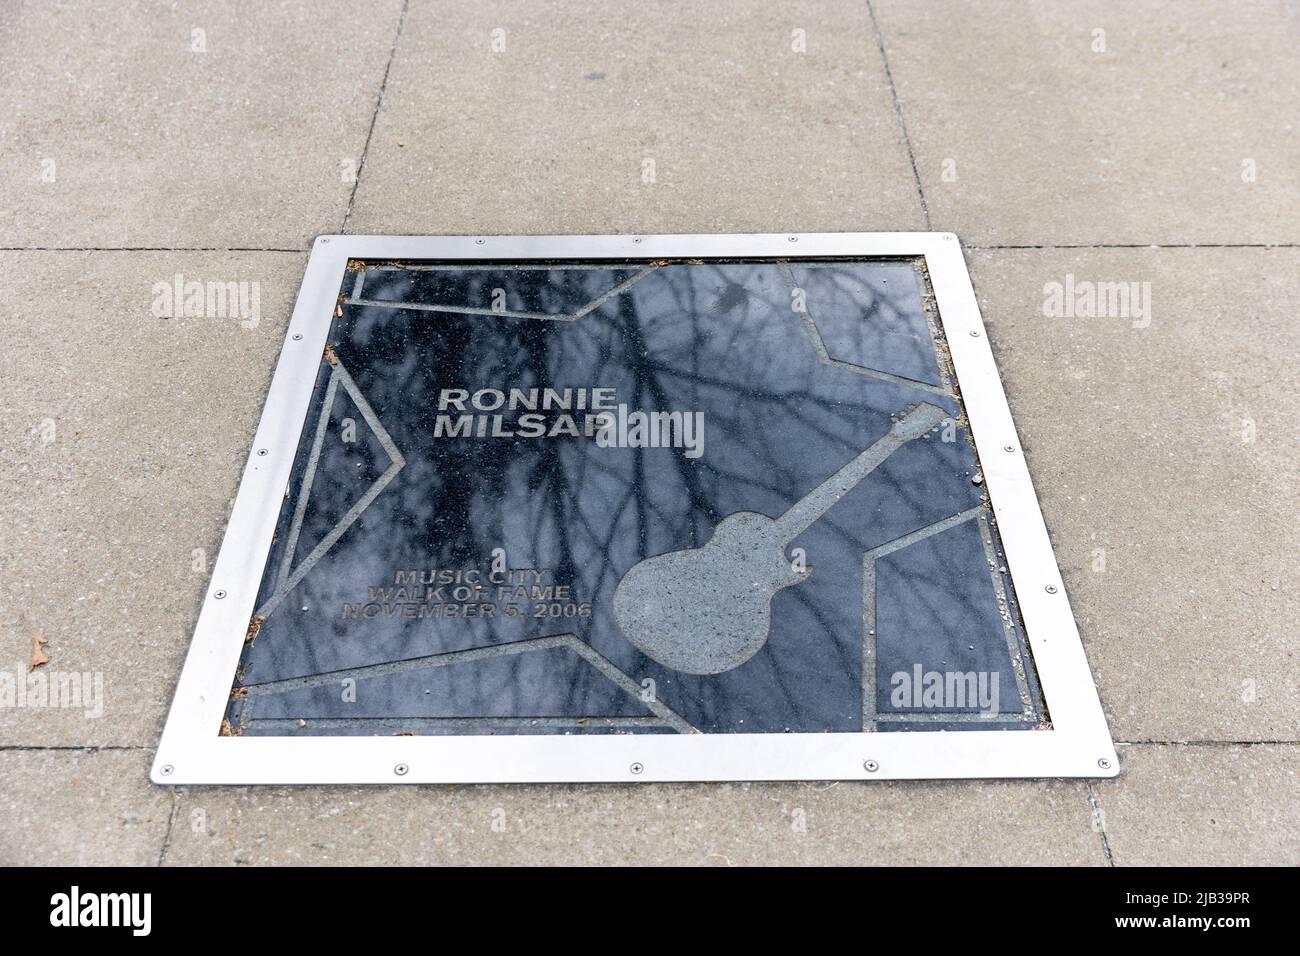 Nashville, TN - March 5, 2022: The Ronnie Milsap star on the Music City Walk of Fame. Stock Photo